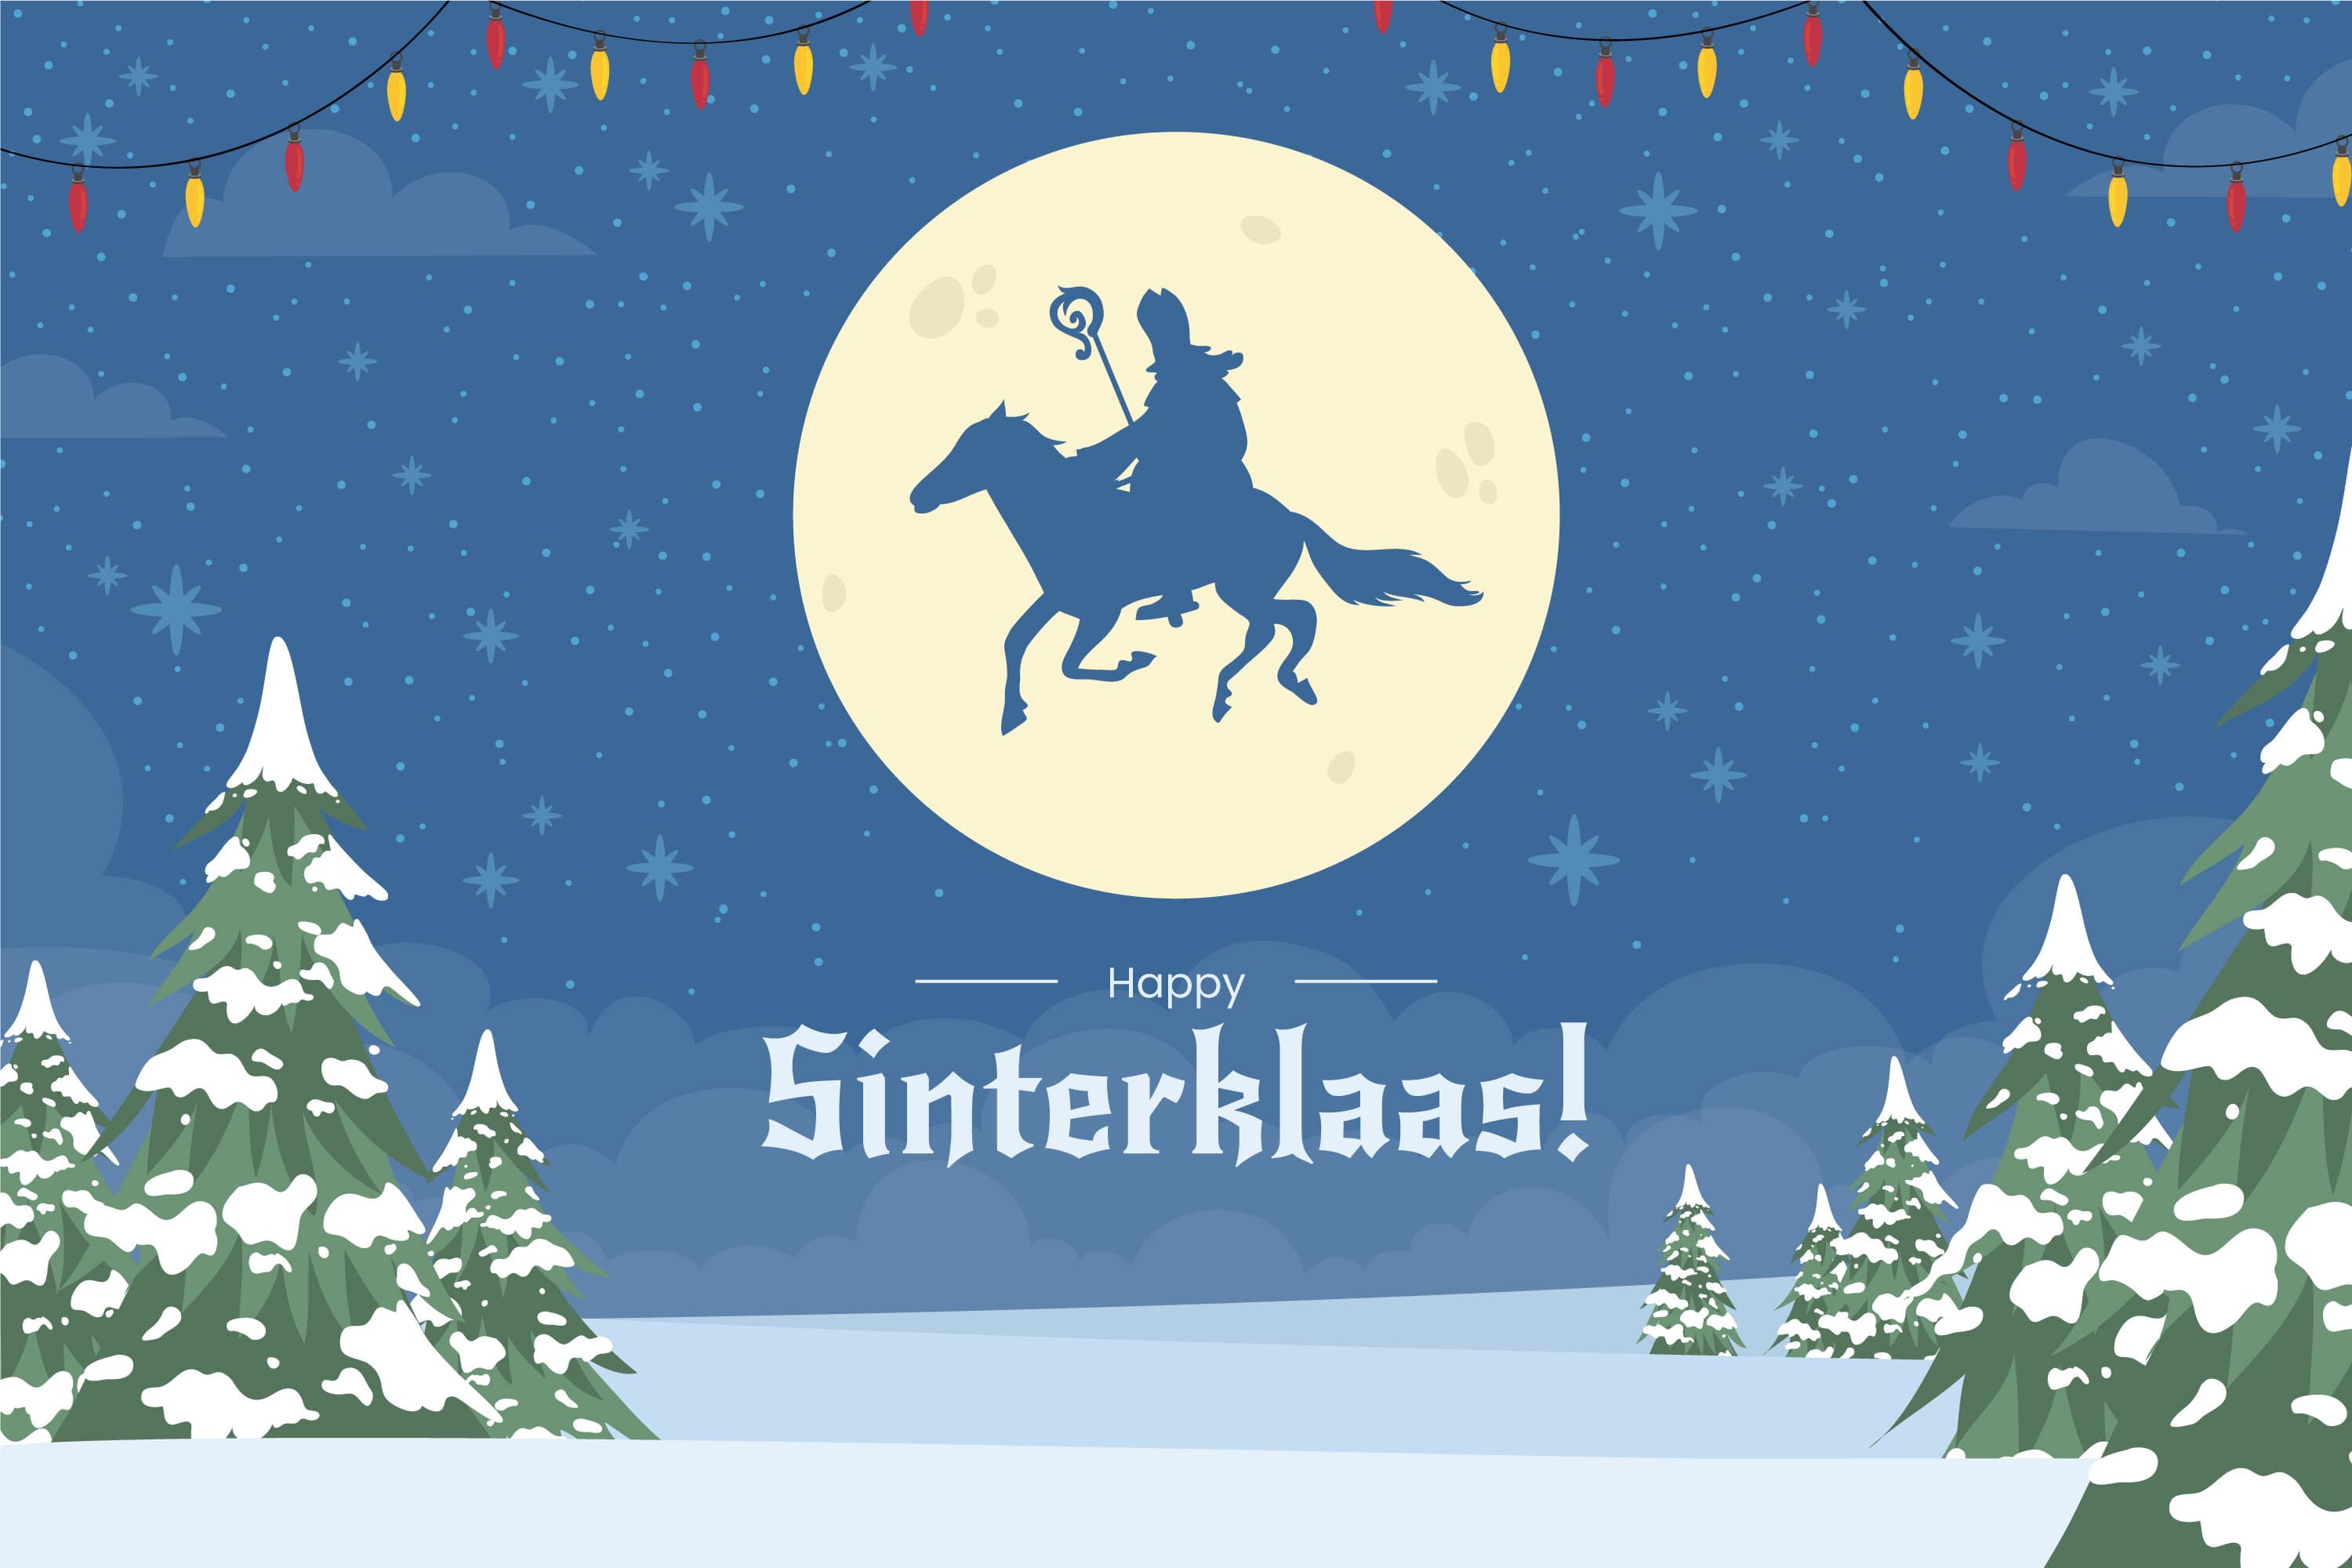 Amazing image with Sinterklaas on a horse over a snowy forest